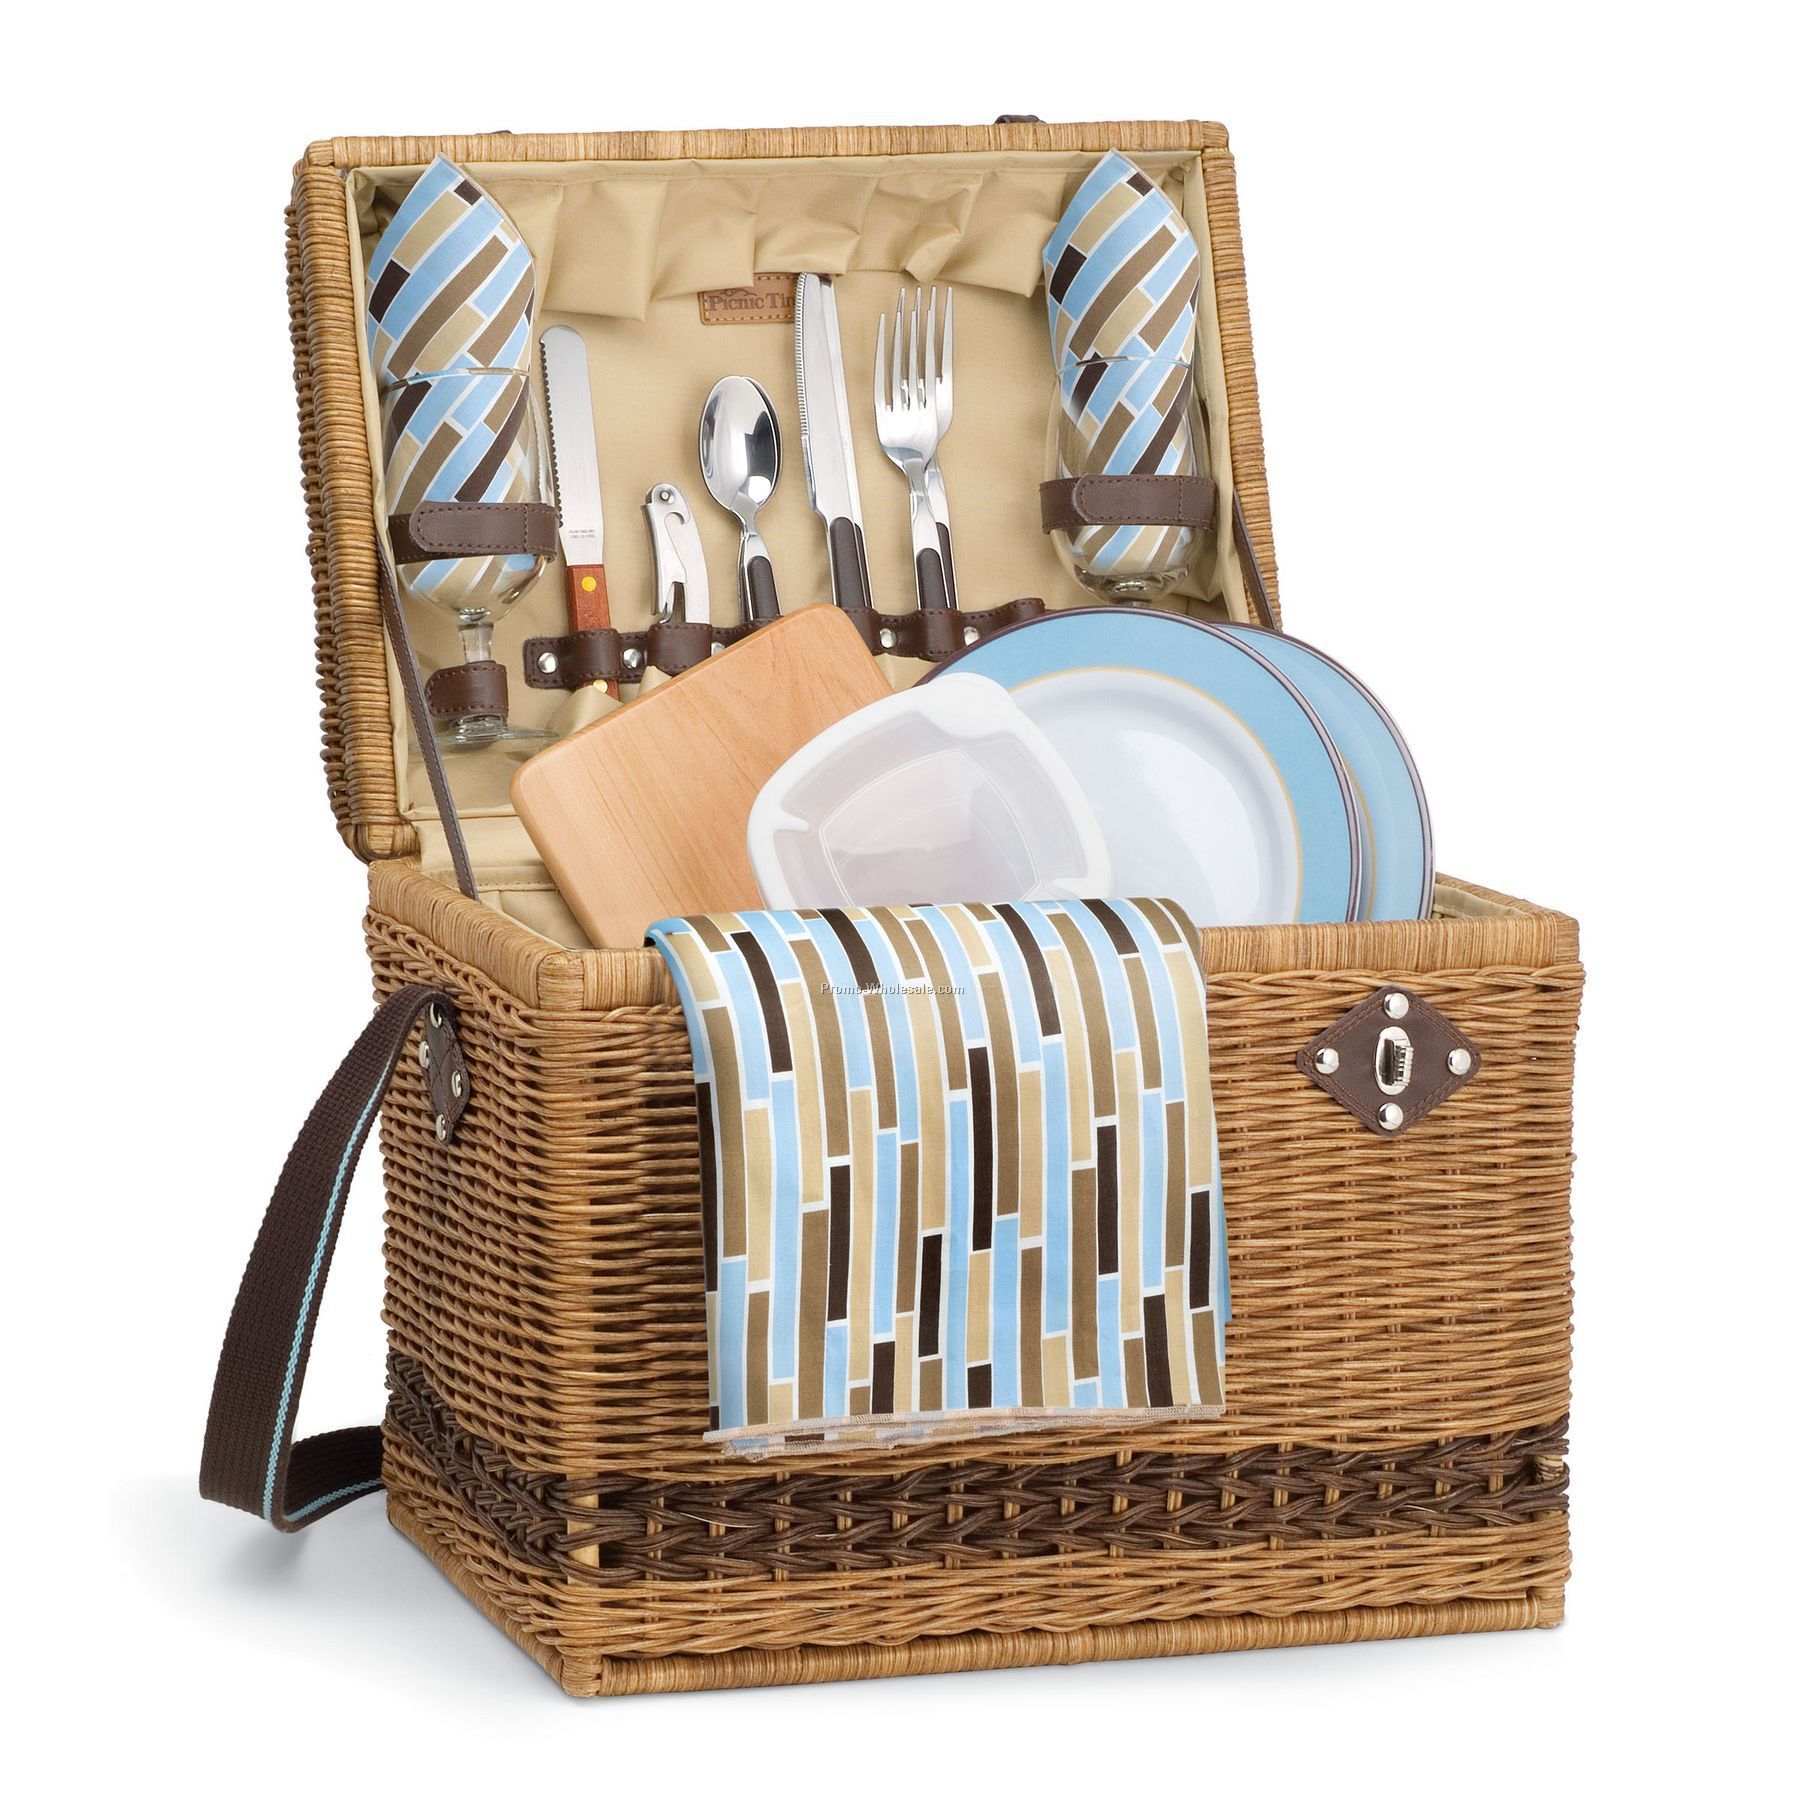 Yellowstone - Driftwood Picnic Basket With Deluxe Service For 2